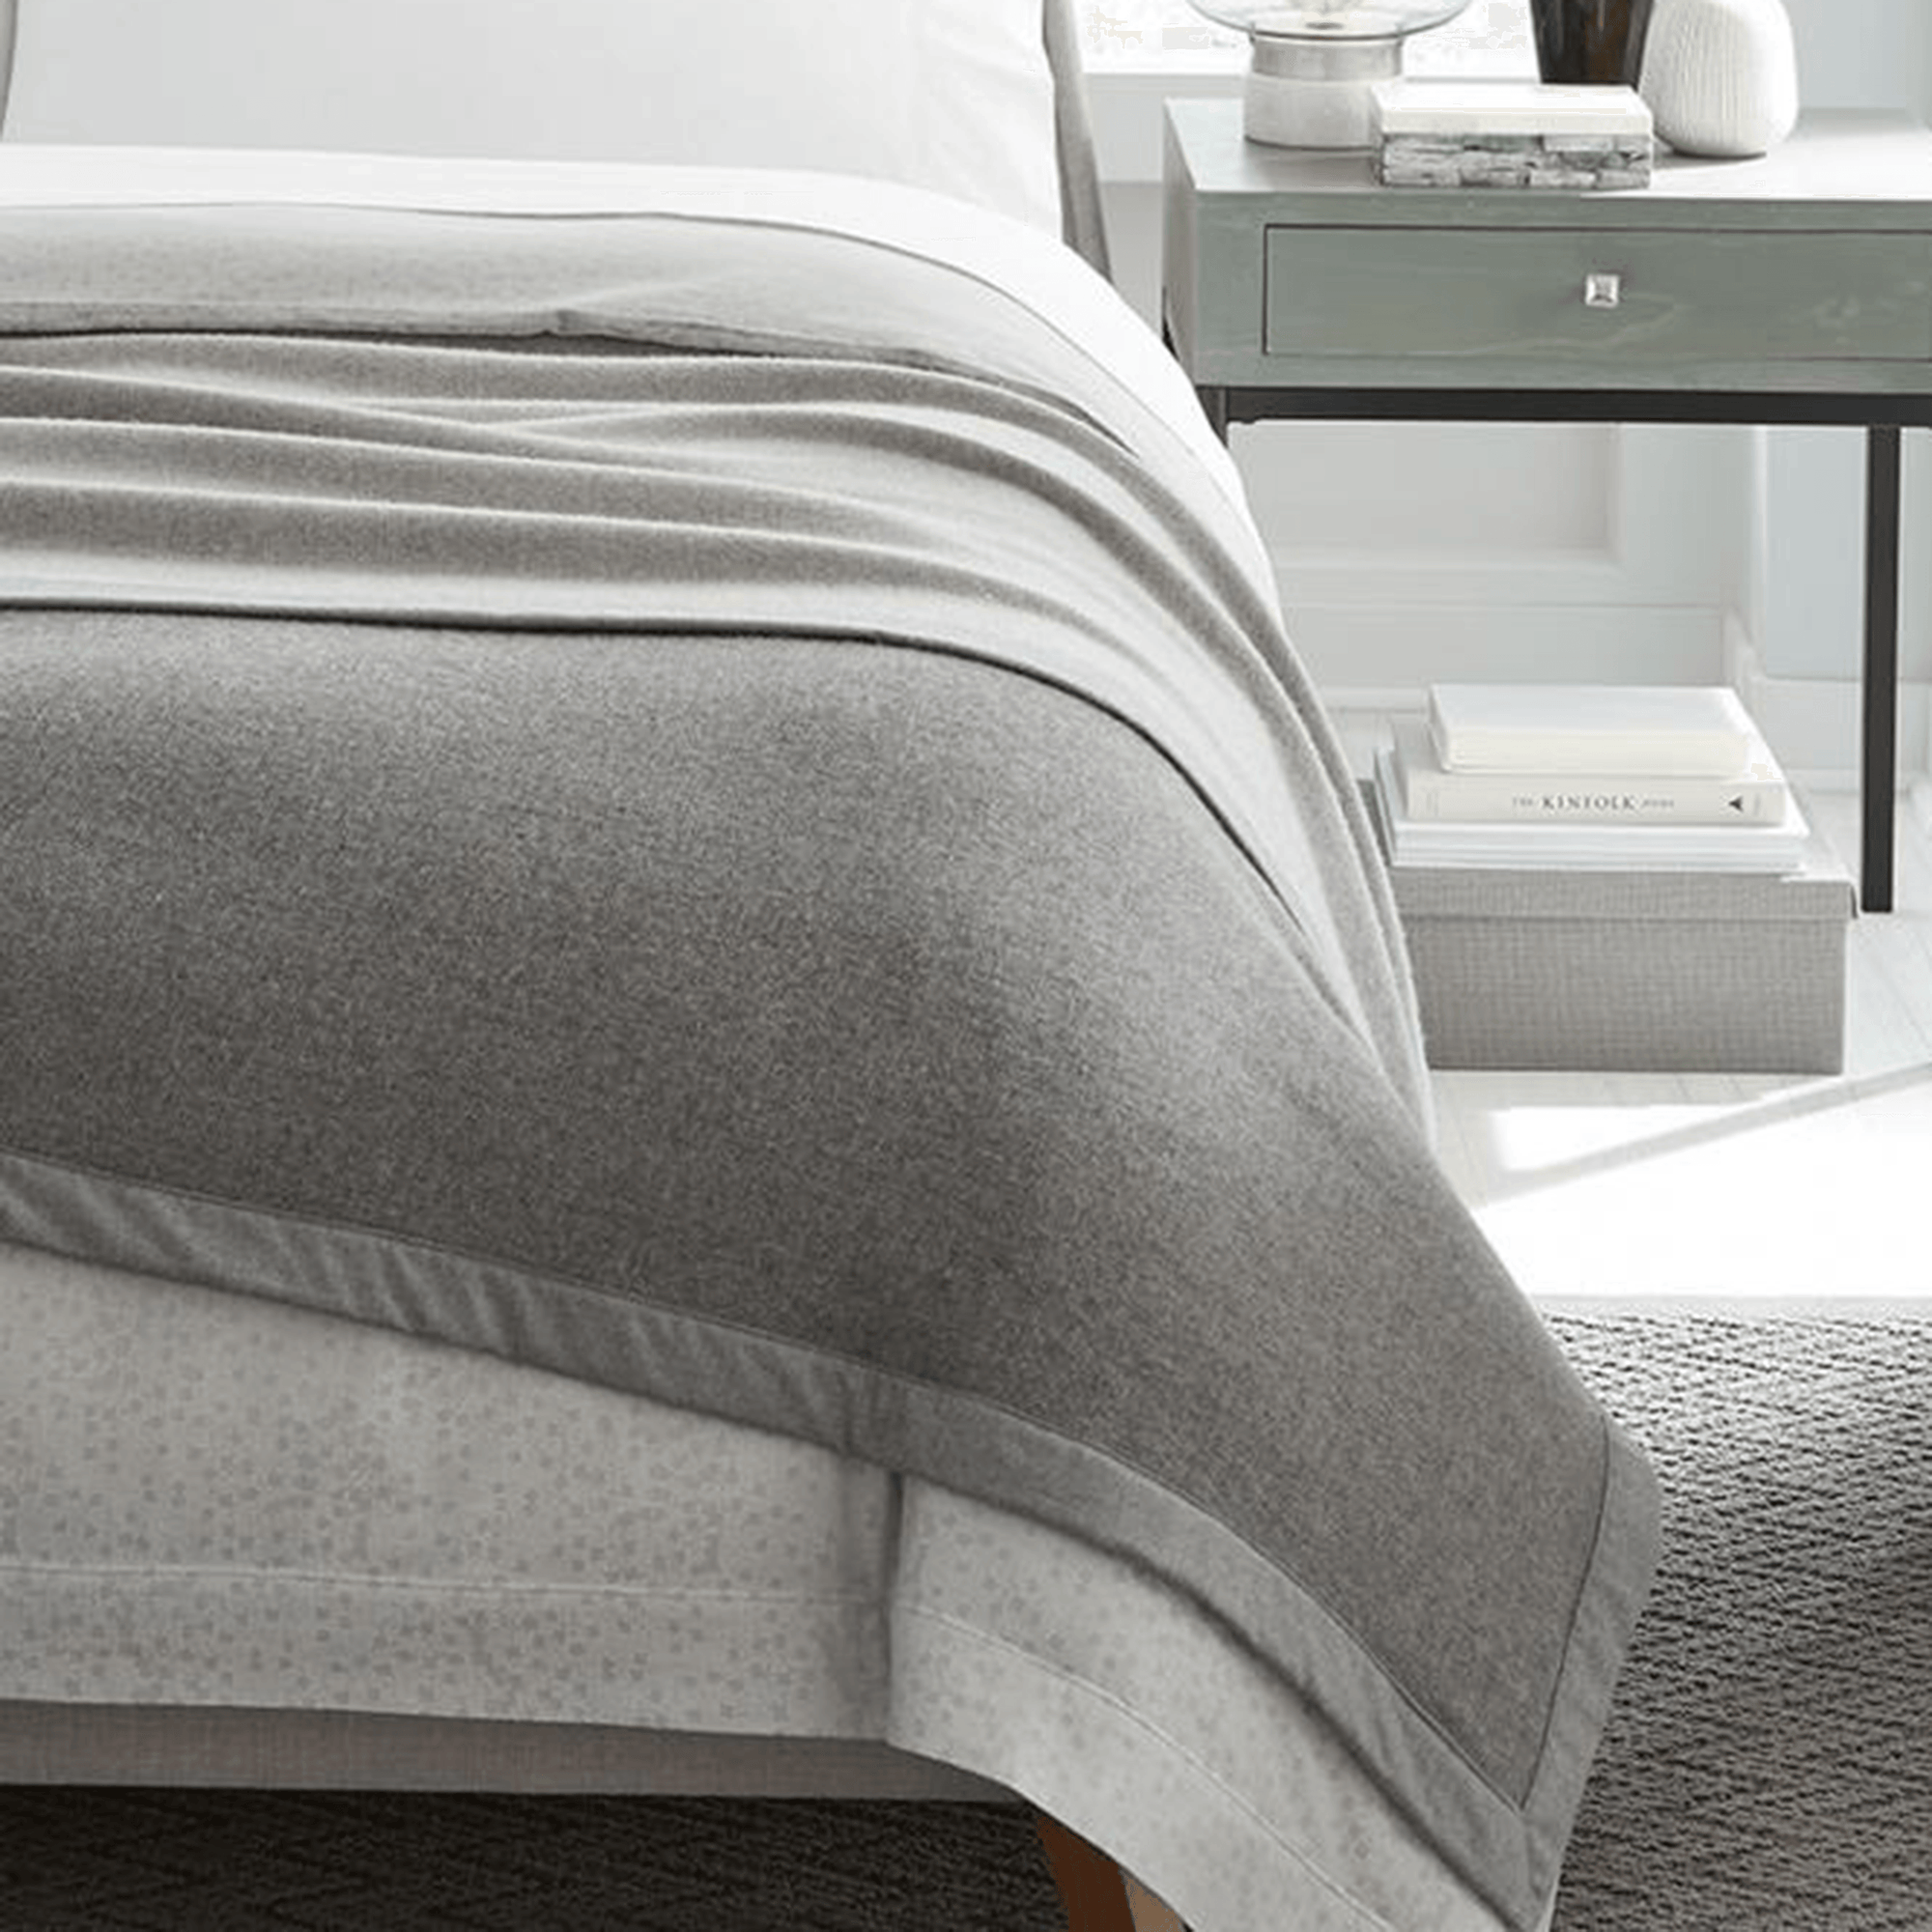 Woven in super-fine Merino wool, the Nerino blanket adds superior warmth and is reversible with differing front and back hues - grey and light grey.